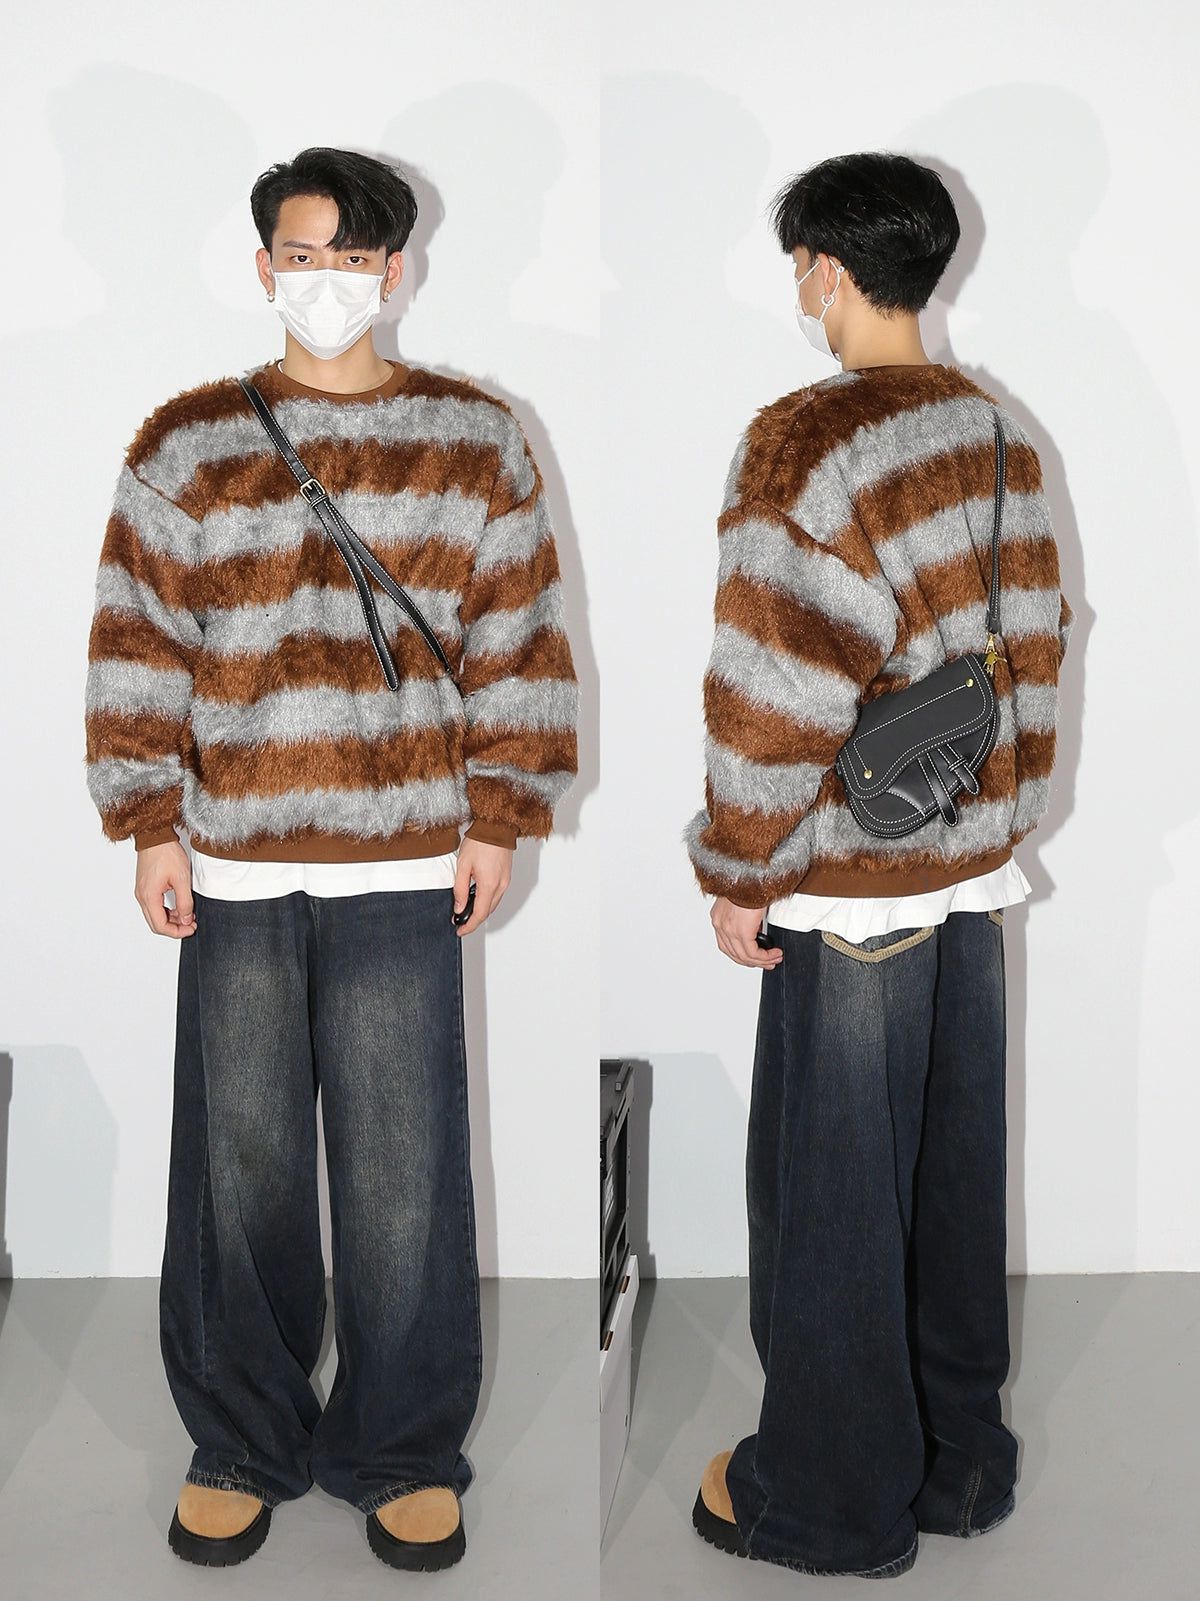 Furry Striped Sweater Korean Street Fashion Sweater By Poikilotherm Shop Online at OH Vault